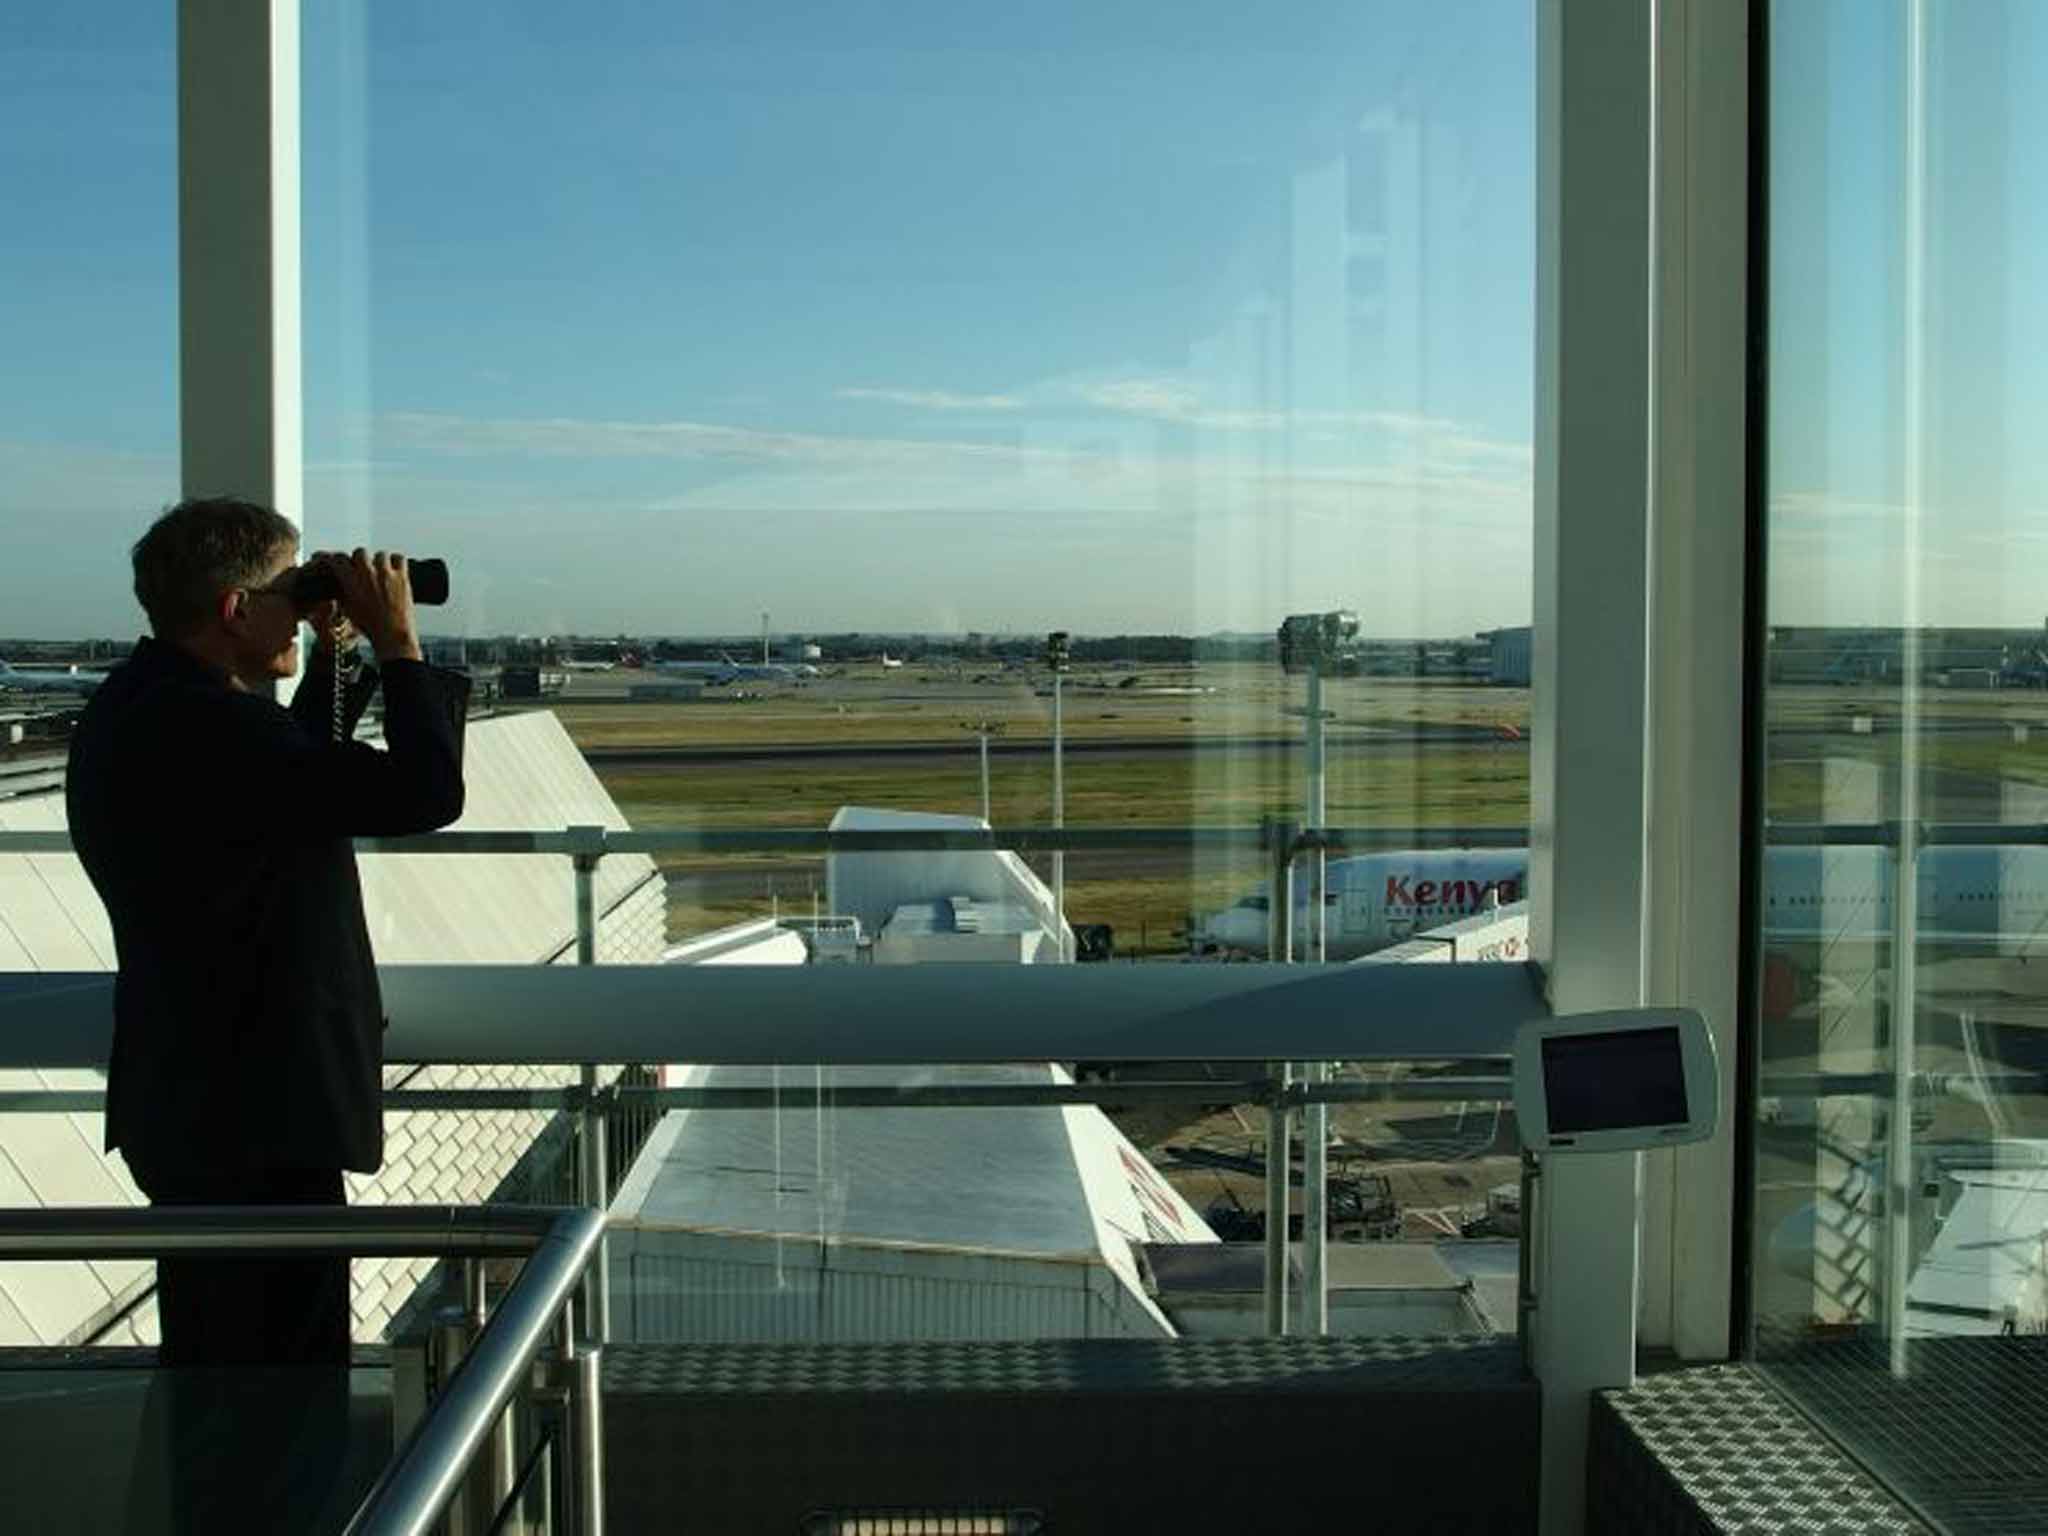 Open skies: a new view from Terminal 4